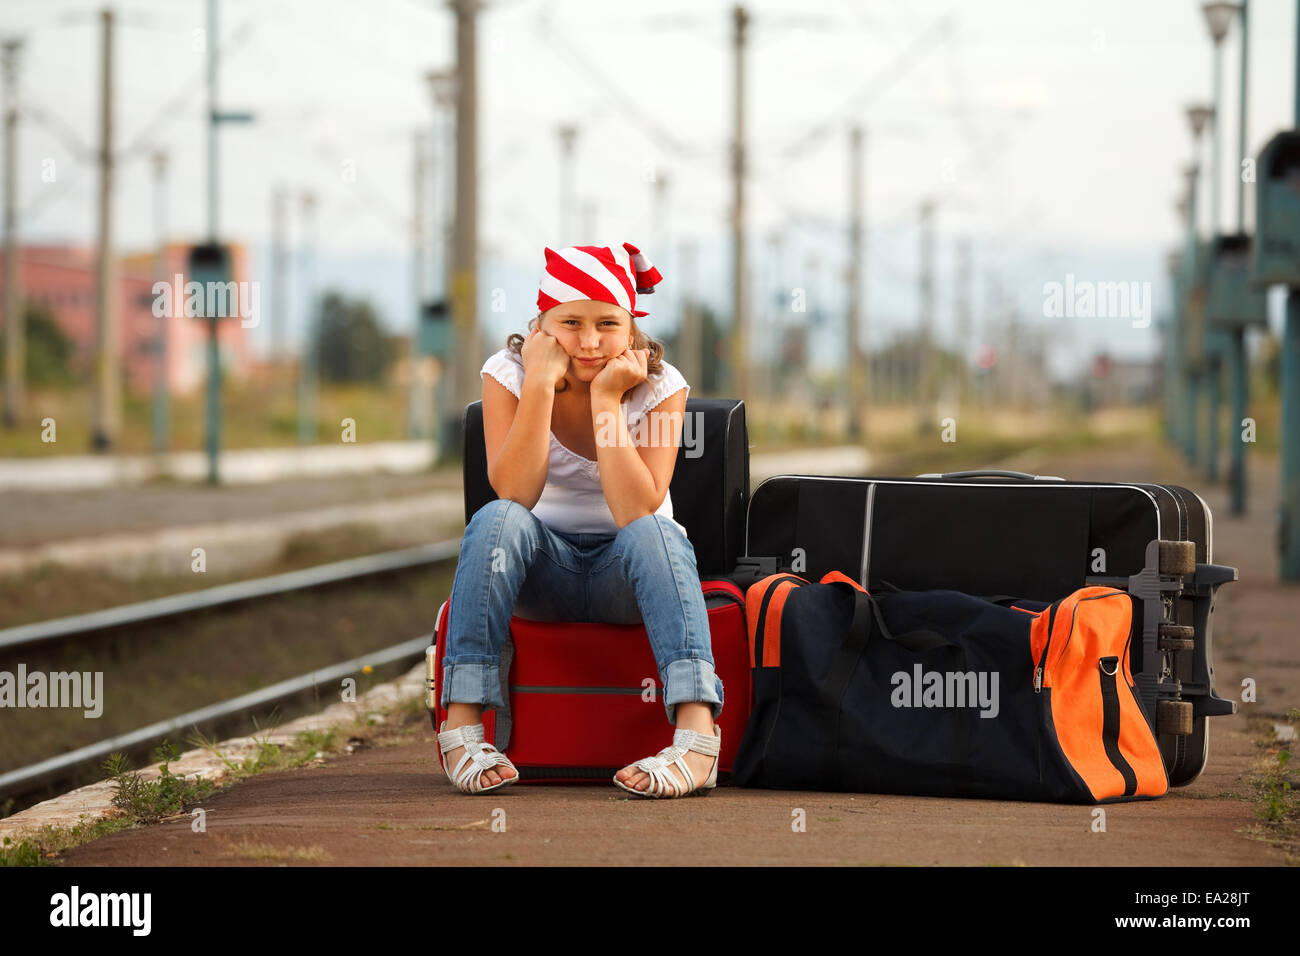 Young girl sitting on bag and waiting for train in the station Stock Photo